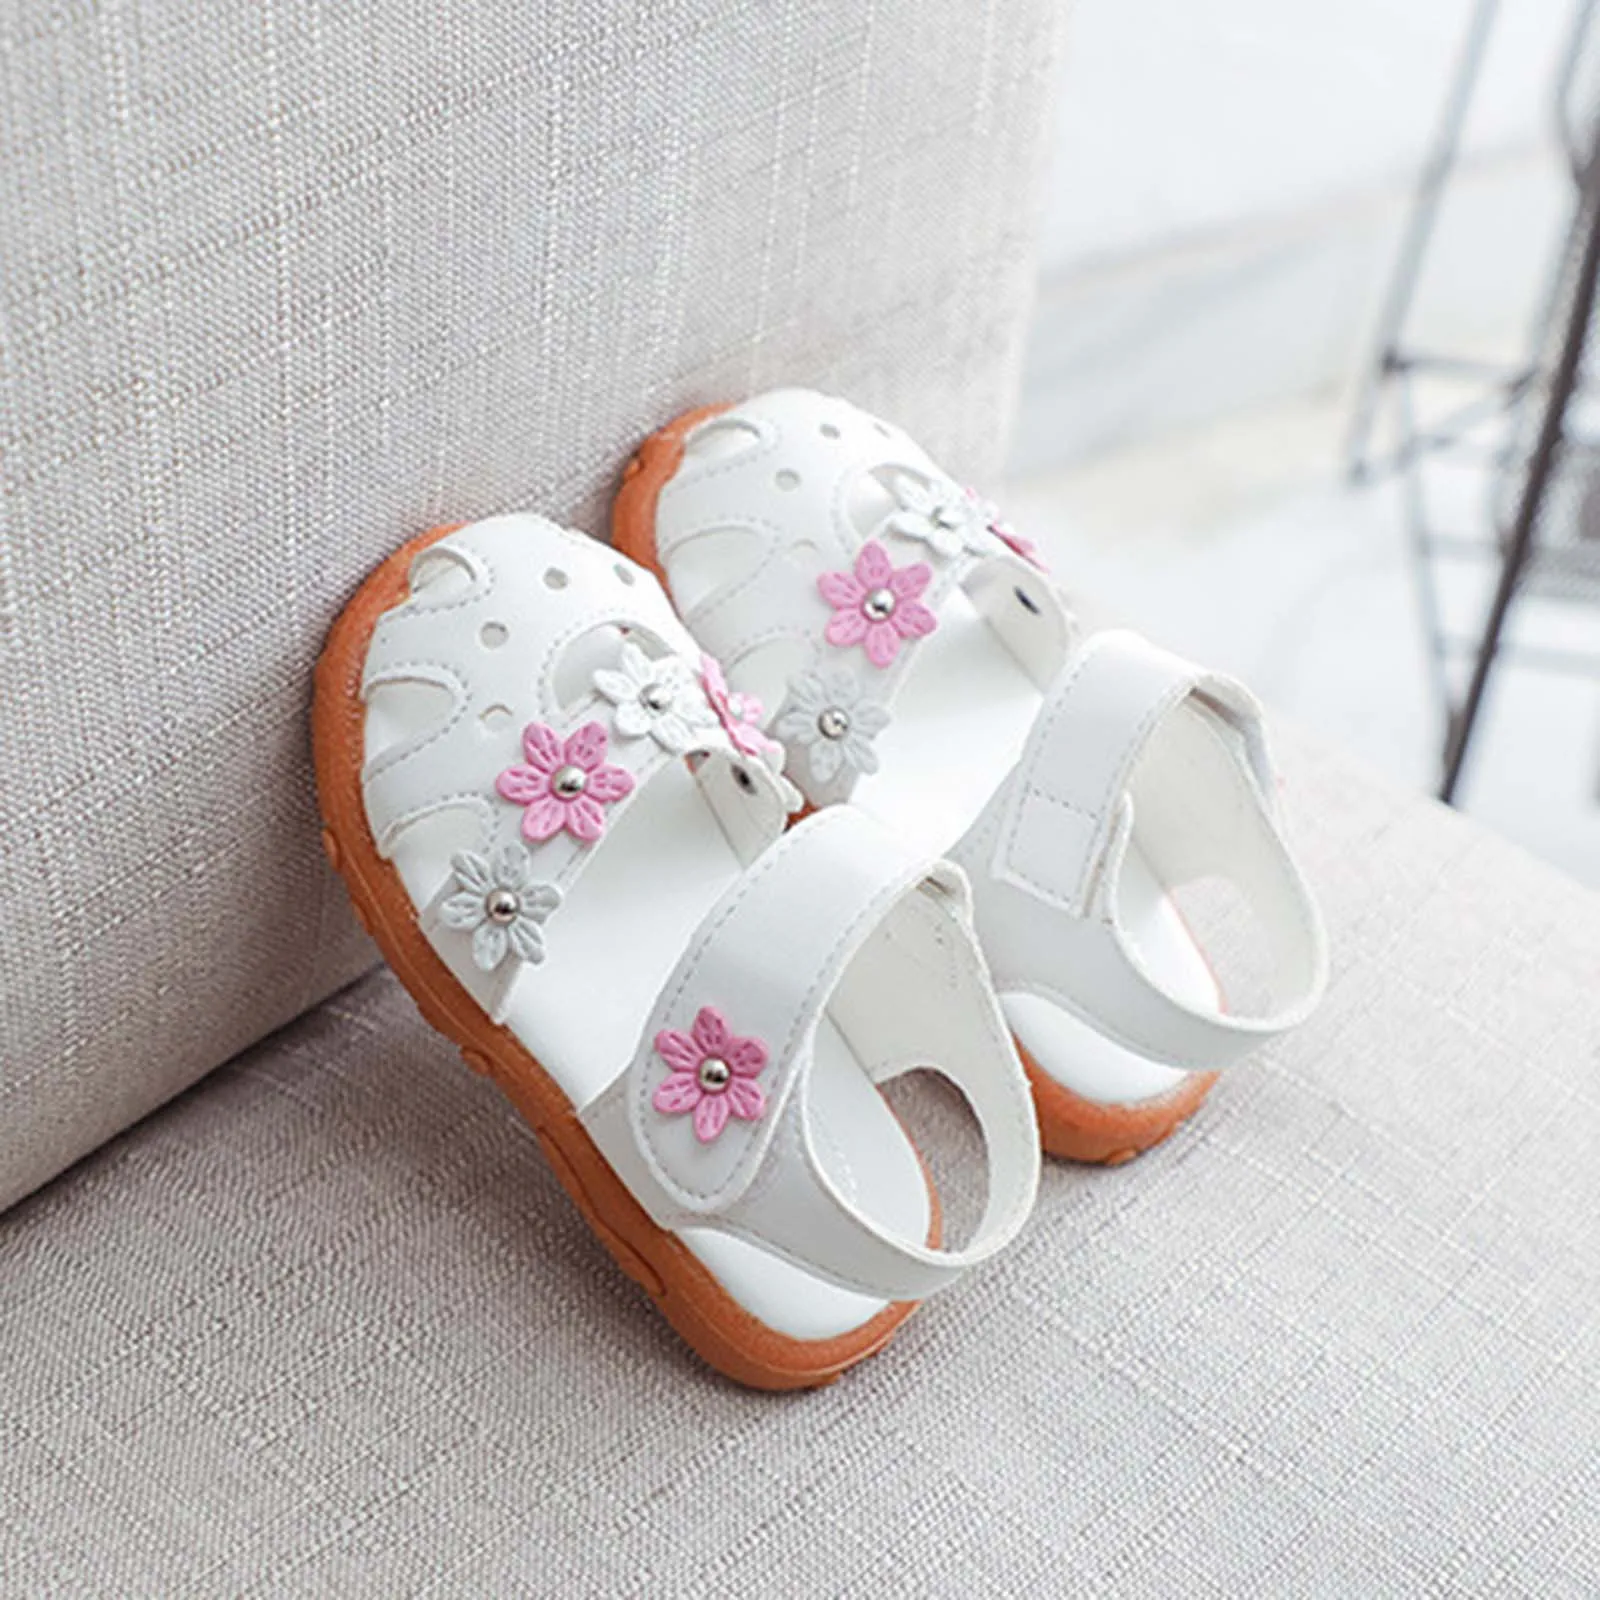 child shoes girl Kid Shoes Baby Girl Sandals 0-8T Infant Toddler Baby Kids Girls Flower Single Princess Party Shoes Sandals sandales Сандалии extra wide fit children's shoes Children's Shoes